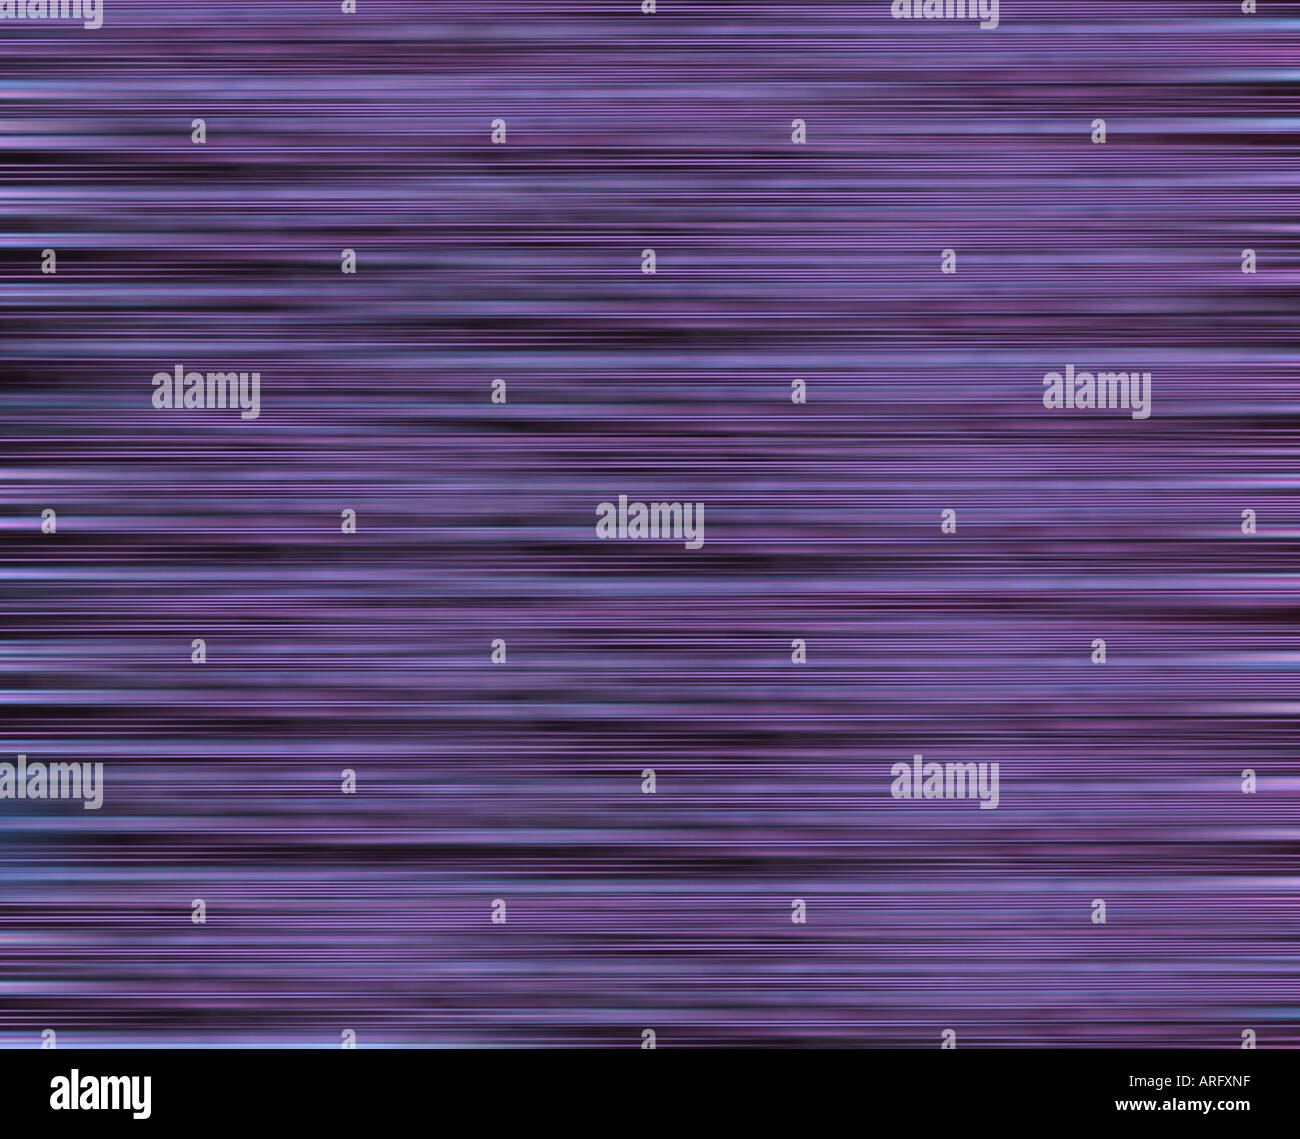 ABSTRACT PURPLE BACKGROUND WITH JAGGED LINE PATTERN Stock Photo